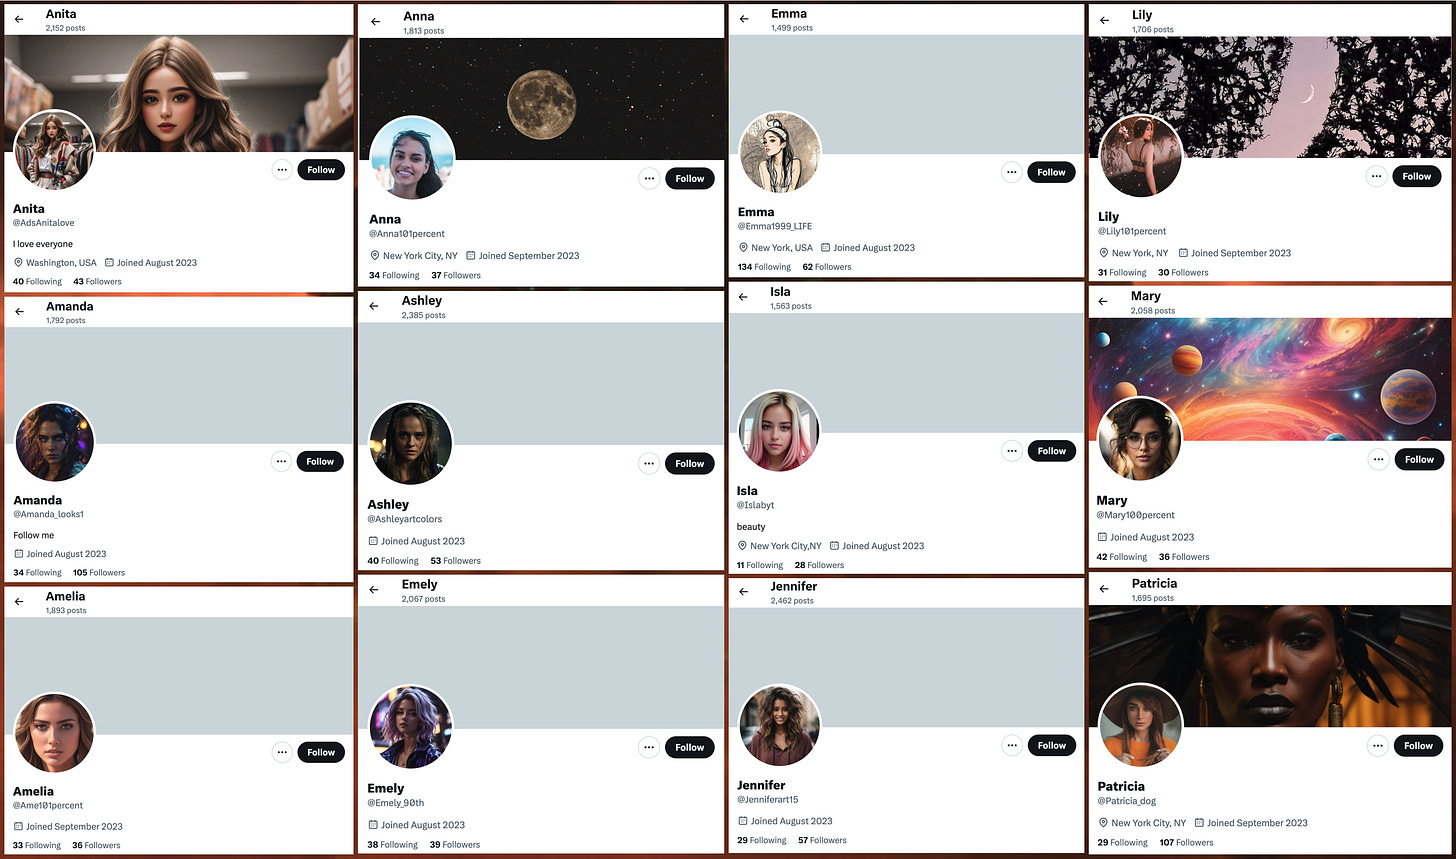 screenshots of the profiles of the 12 female-presenting accounts in the network, all created in 2023